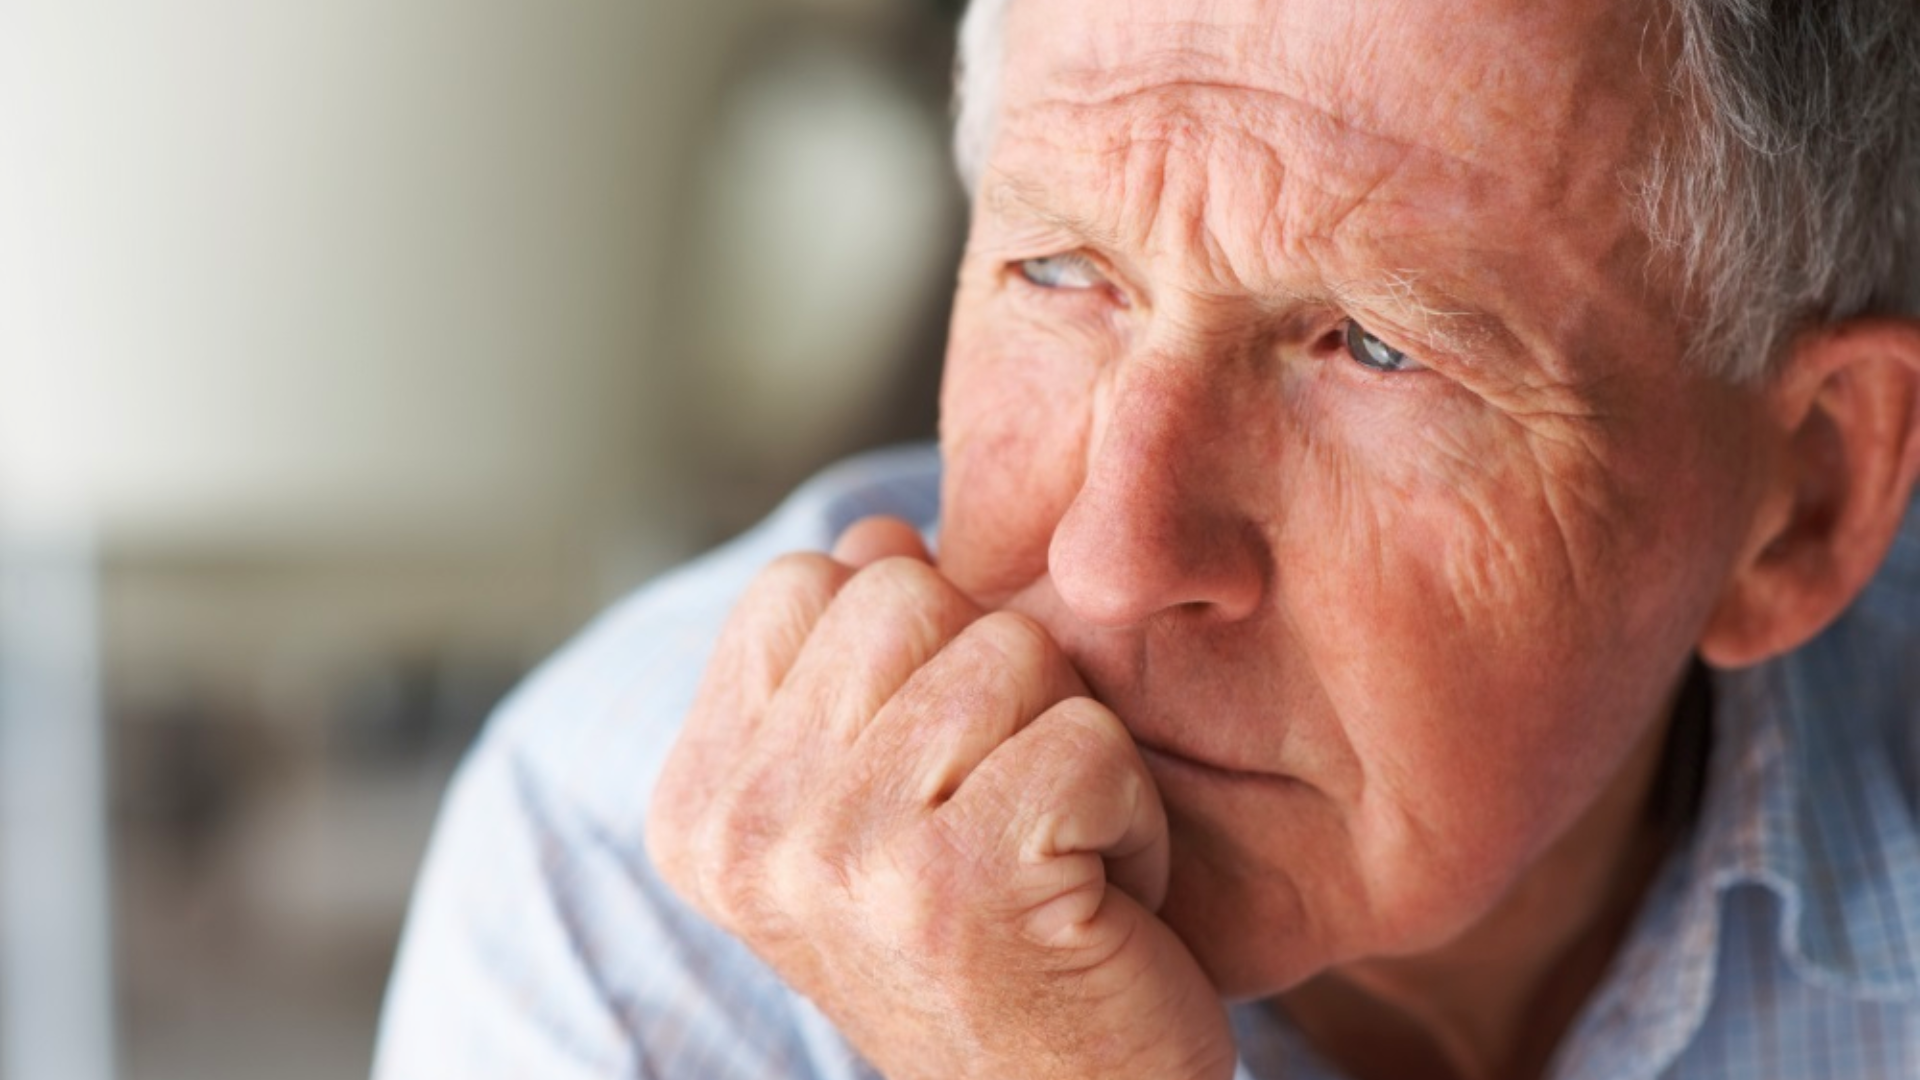 New Study Suggests Anxiety May Double The Risk Of Parkinson’s Disease In People Over 50